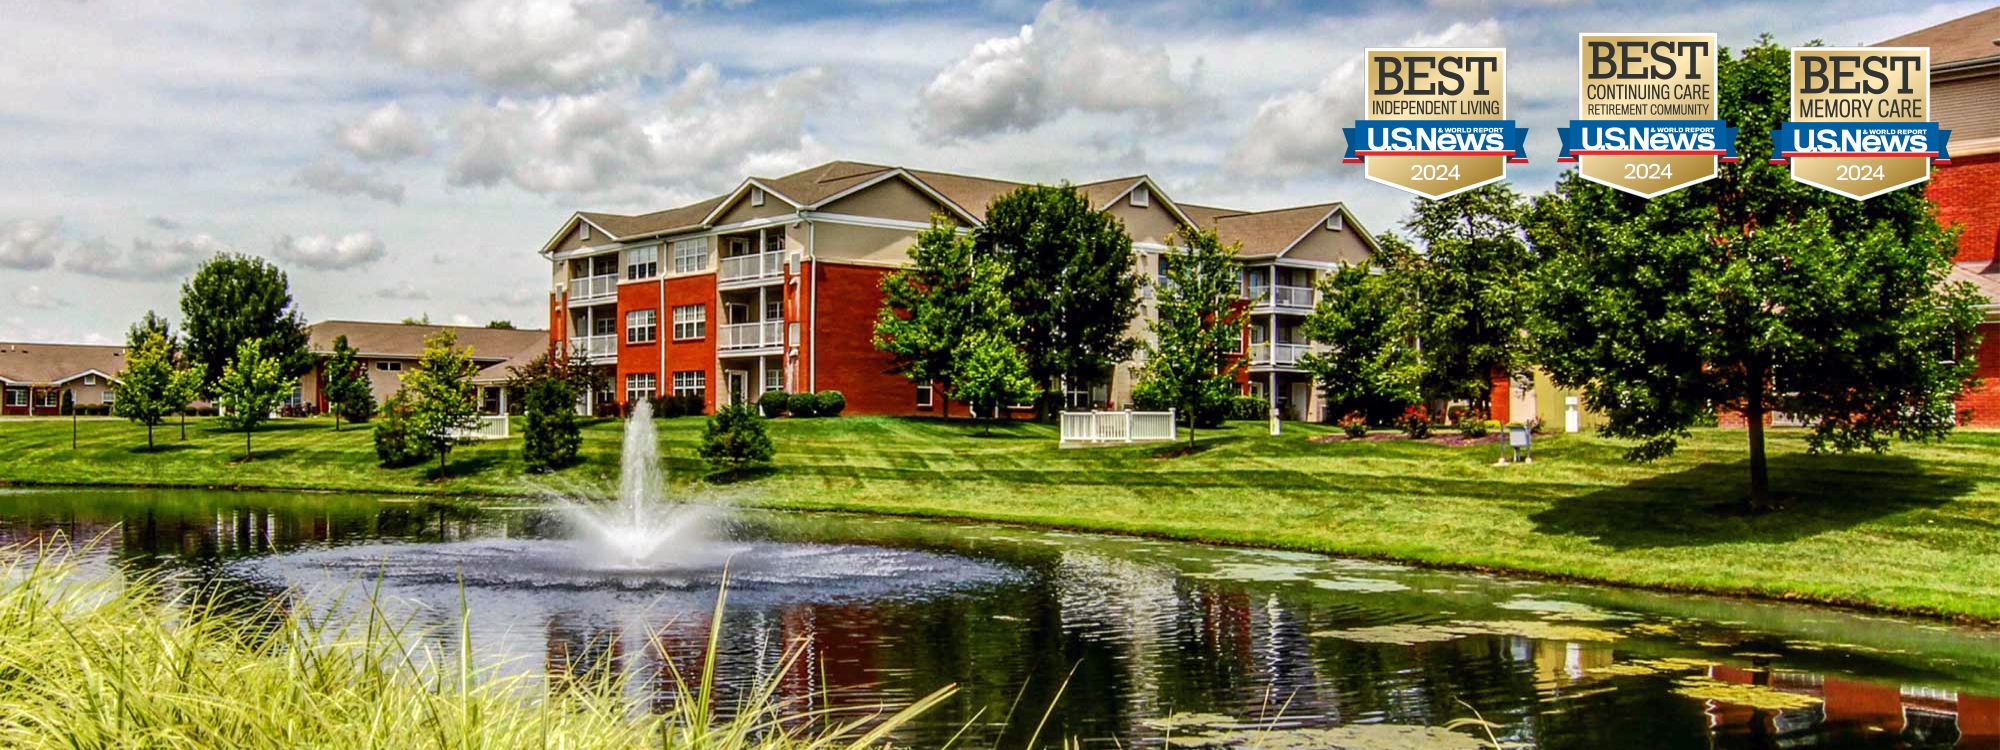 A look at the Meridian Village assisted living community in Glen Carbon, IL, awarded Best Independent Living & Memory Care and Continuing Care Retirement Community by US News.